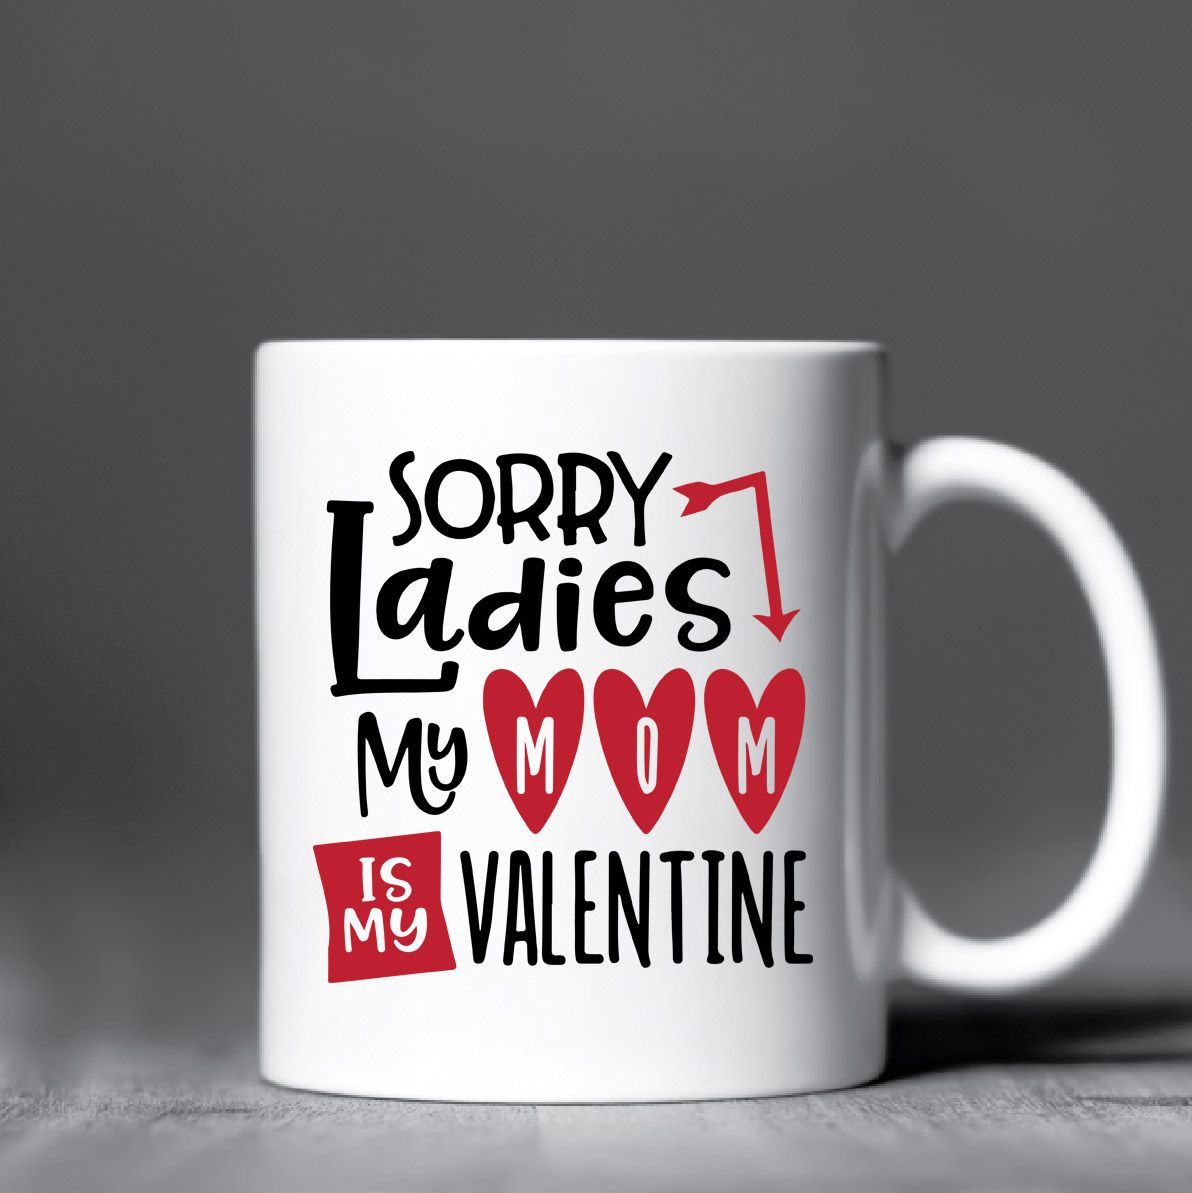 Valentine Gift Ideas For Mom
 SORRY LADIES MY MOM IS MY VALENTINE mothers day ts